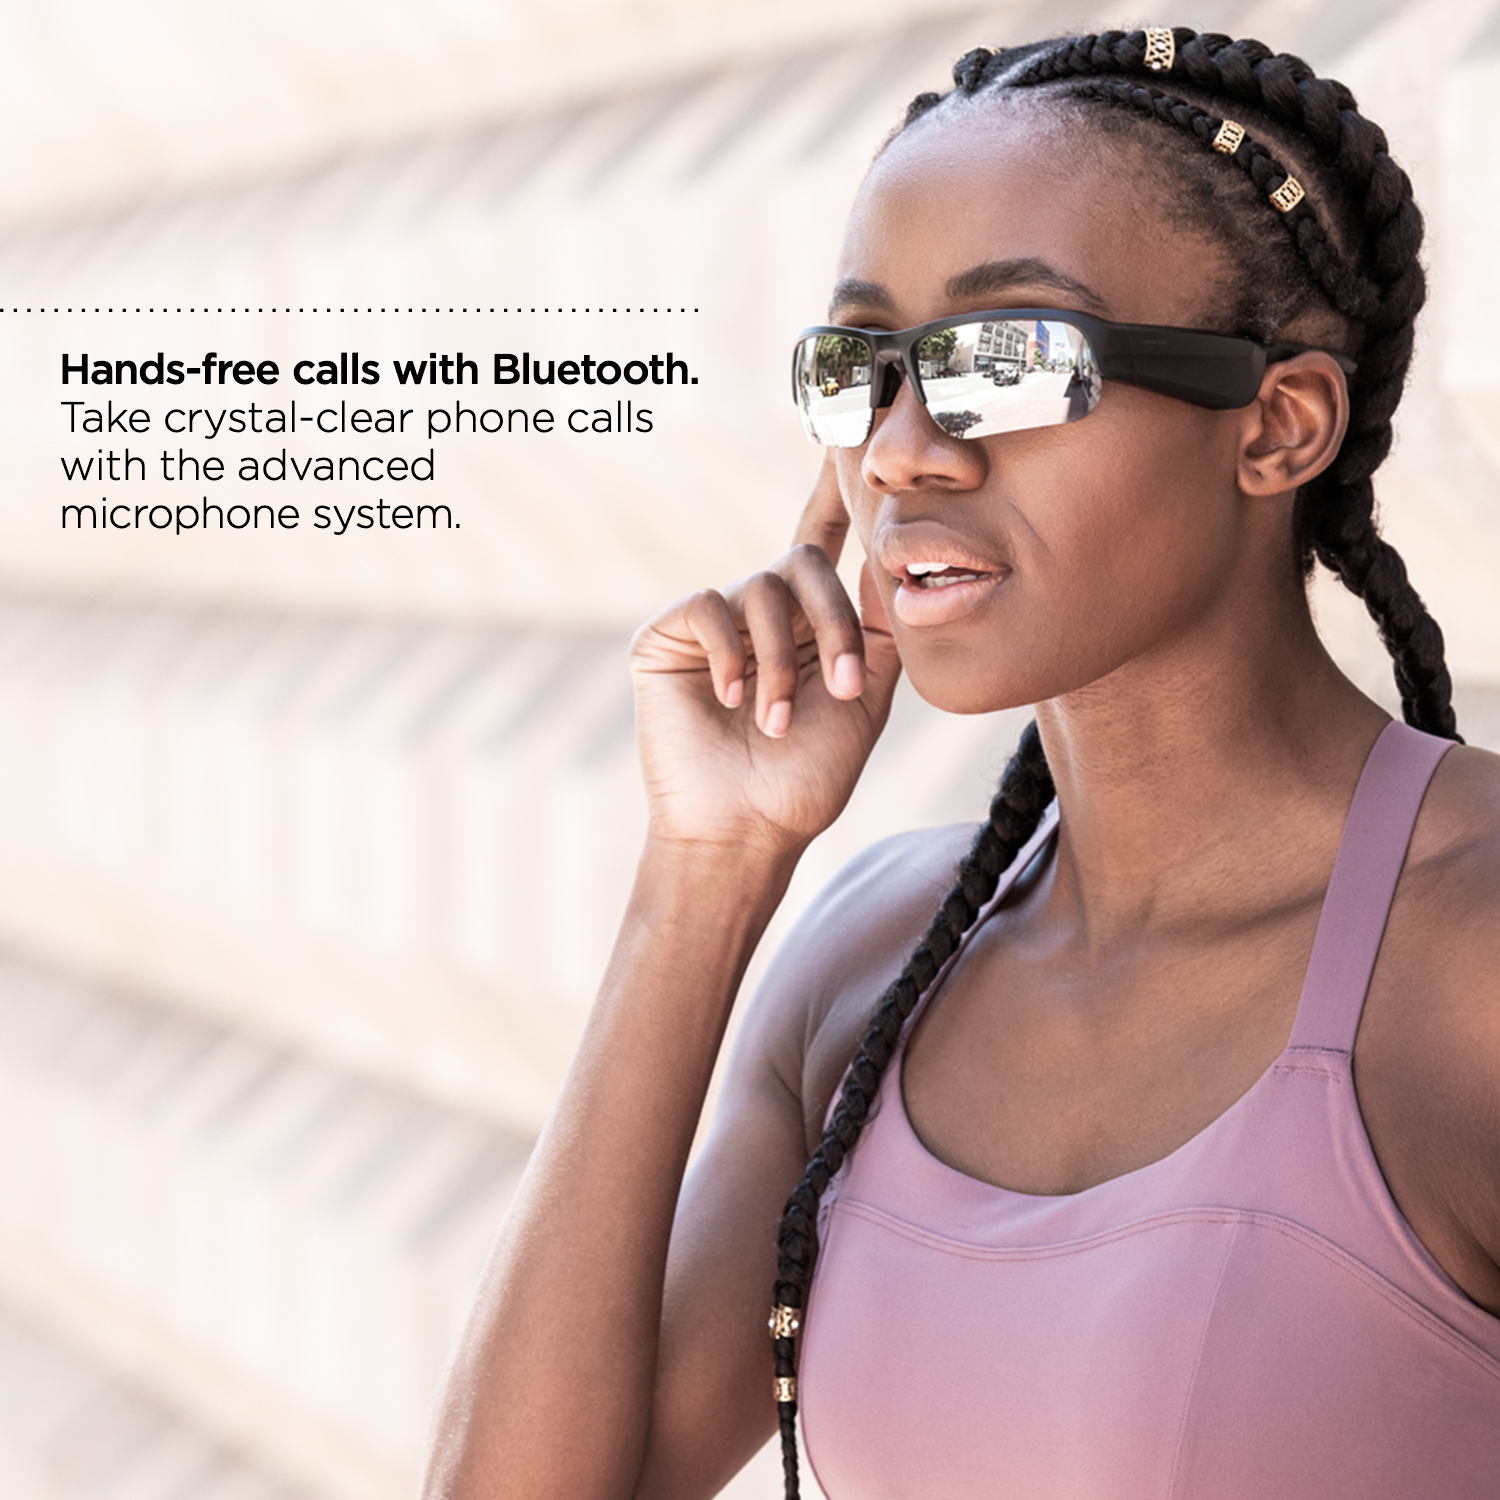 Bose Frames Tempo Bluetooth Sports Sunglasses with Polarized Lenses, Black - image 5 of 12